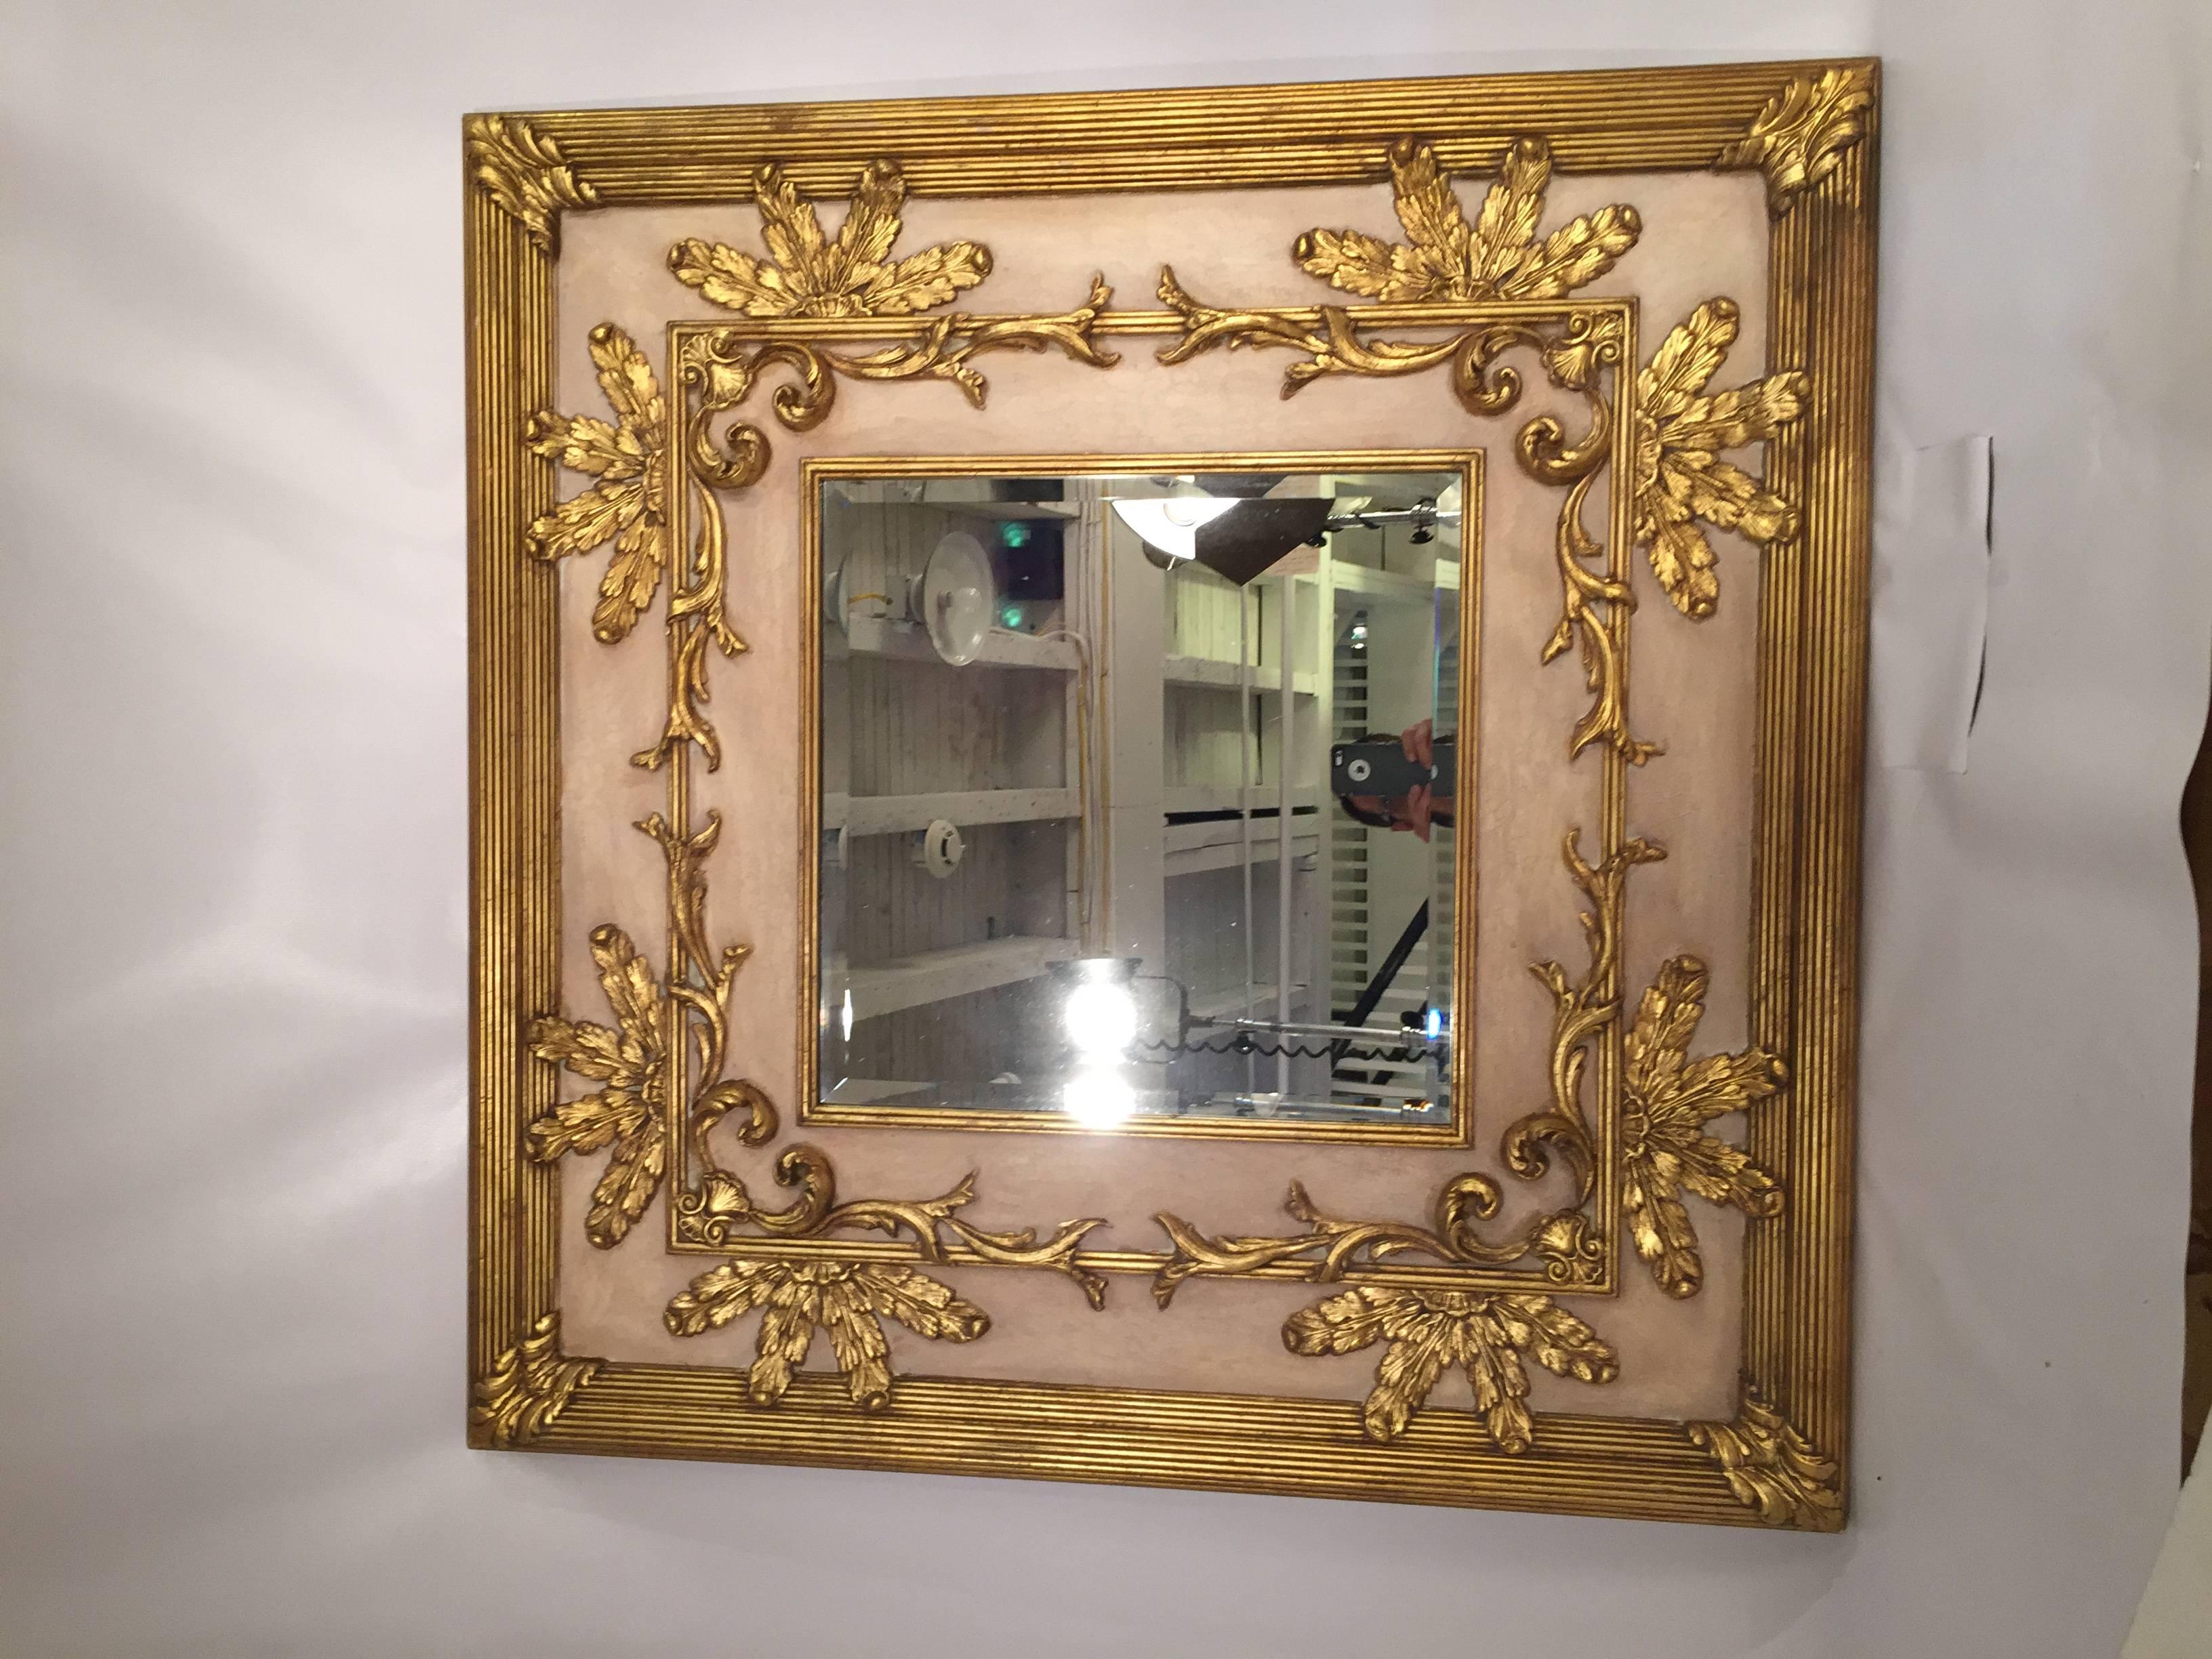 Opulent gilt and beveled glass mirror made by the premier mirror maker Friedman Brothers. Louis XV style with a flesh toned background accented by gilt scrolls and acanthus leaves. The outer reeded frame surrounds a 12.5" think generous frame.